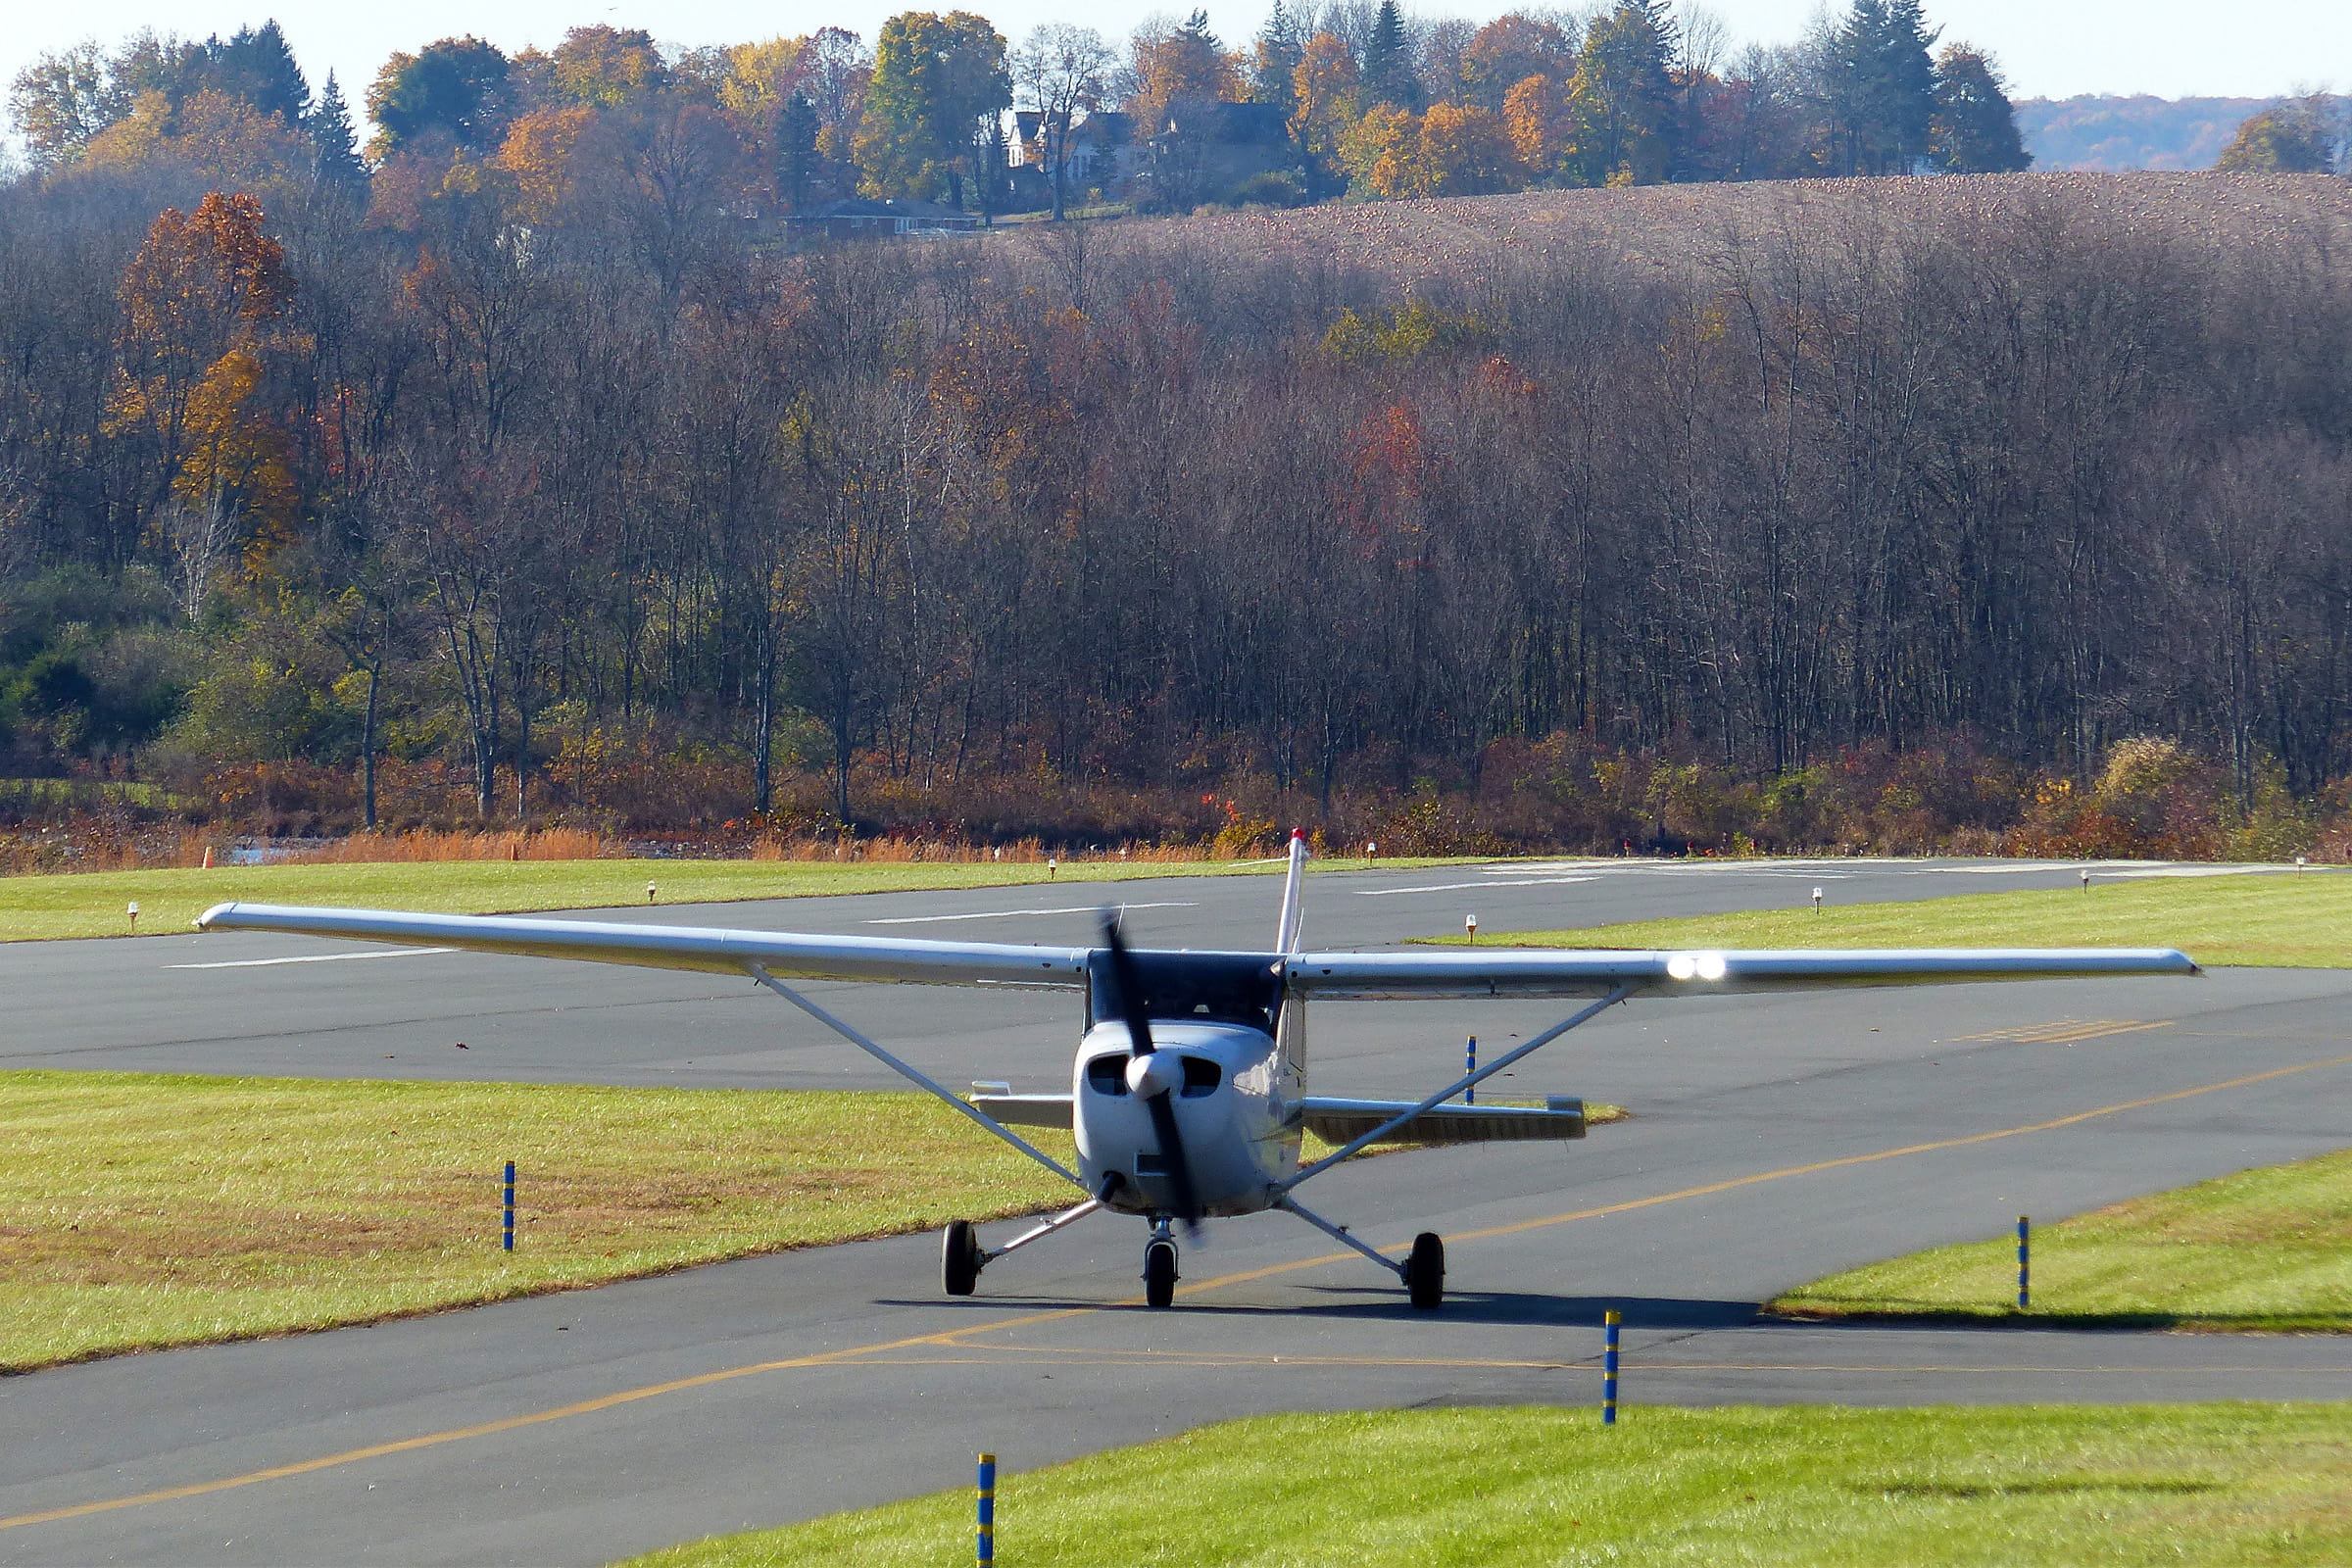 A Cessna single engine private airplane on the tarmac waiting for takeoff.